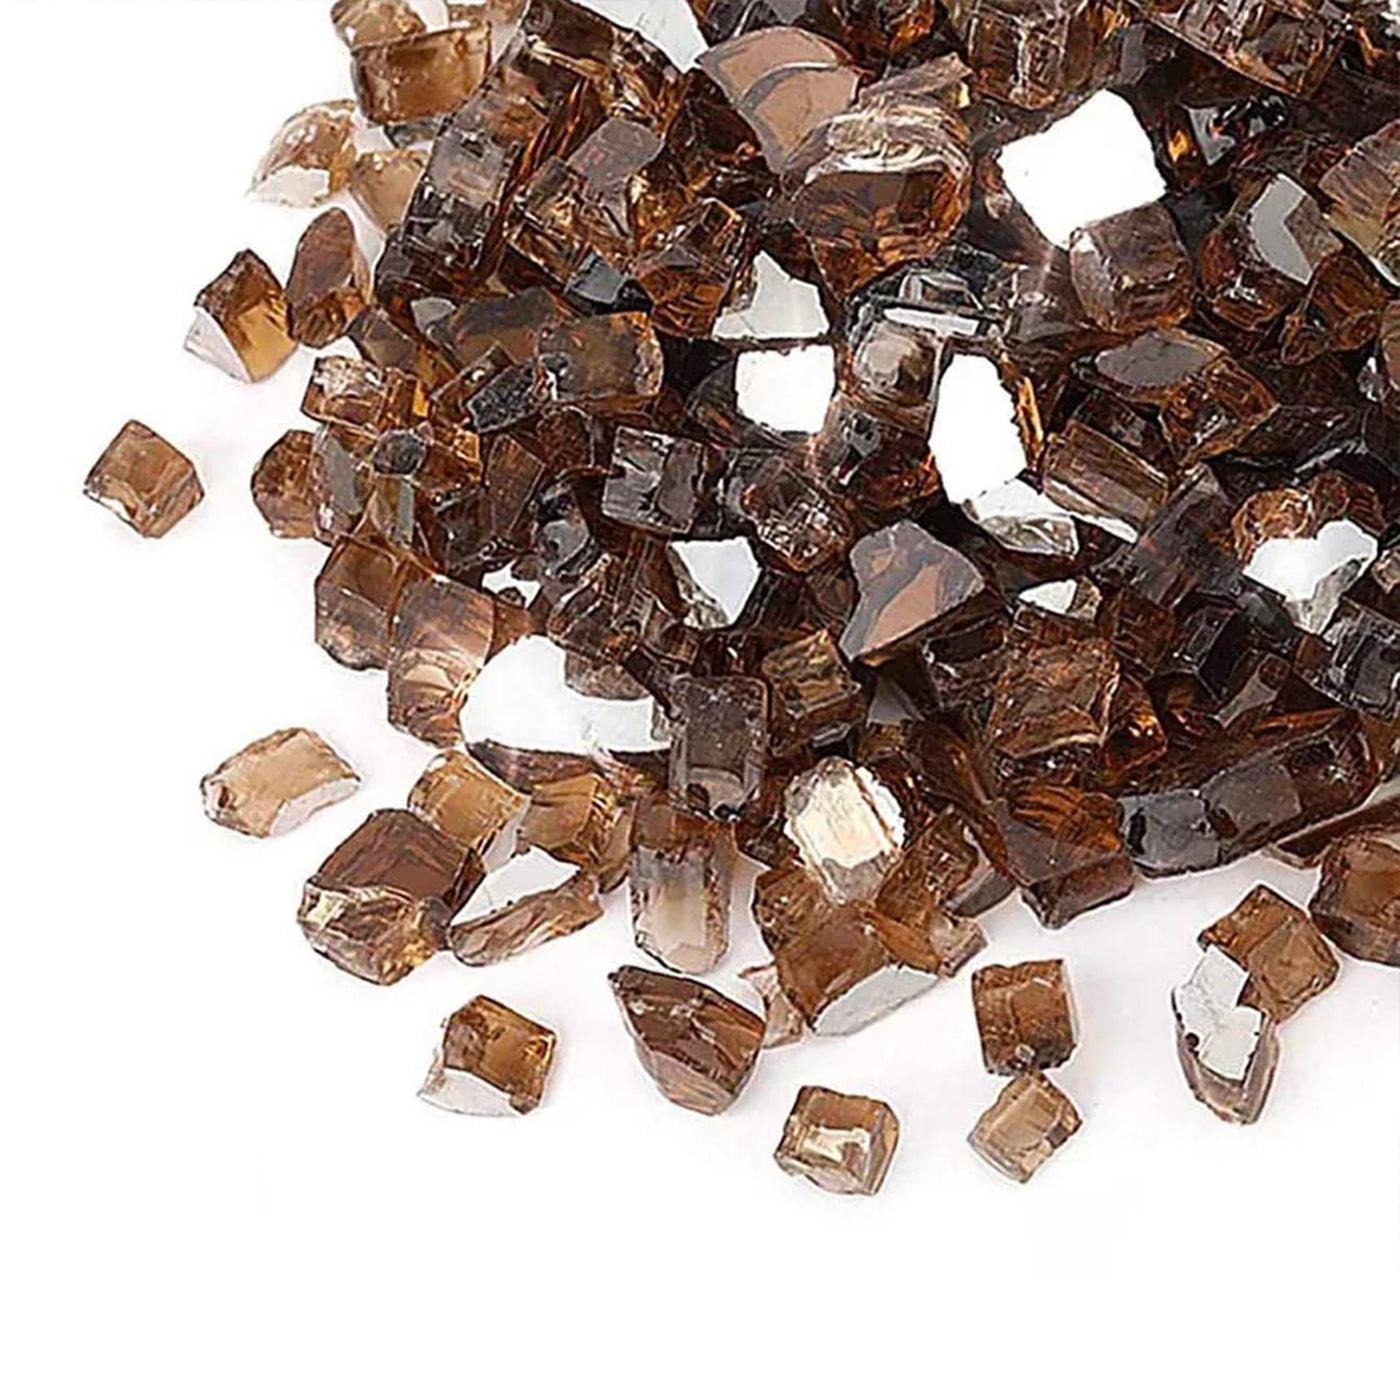 Crushed Fire Glass, 10 LBS, 1.5" Pieces, Multiple Colors